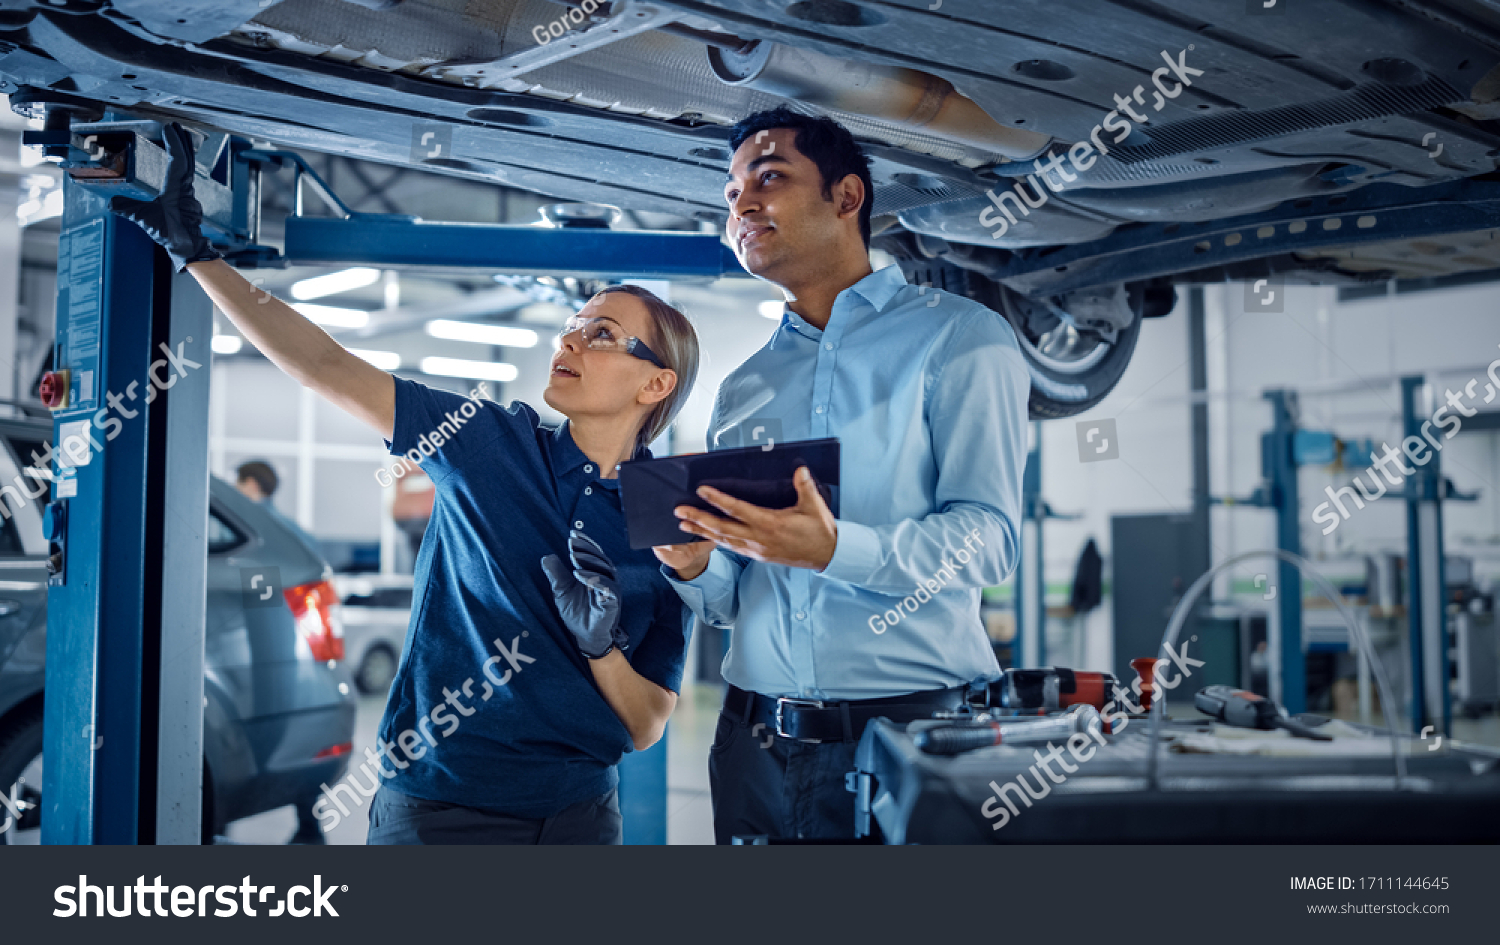 Female Mechanic Talking to a Manager Under a Vehicle in a Car Service. Specialist is Showing Info on a Tablet Computer. Empowering Woman Wearing Gloves and Safety Gloves. Modern Clean Workshop. #1711144645